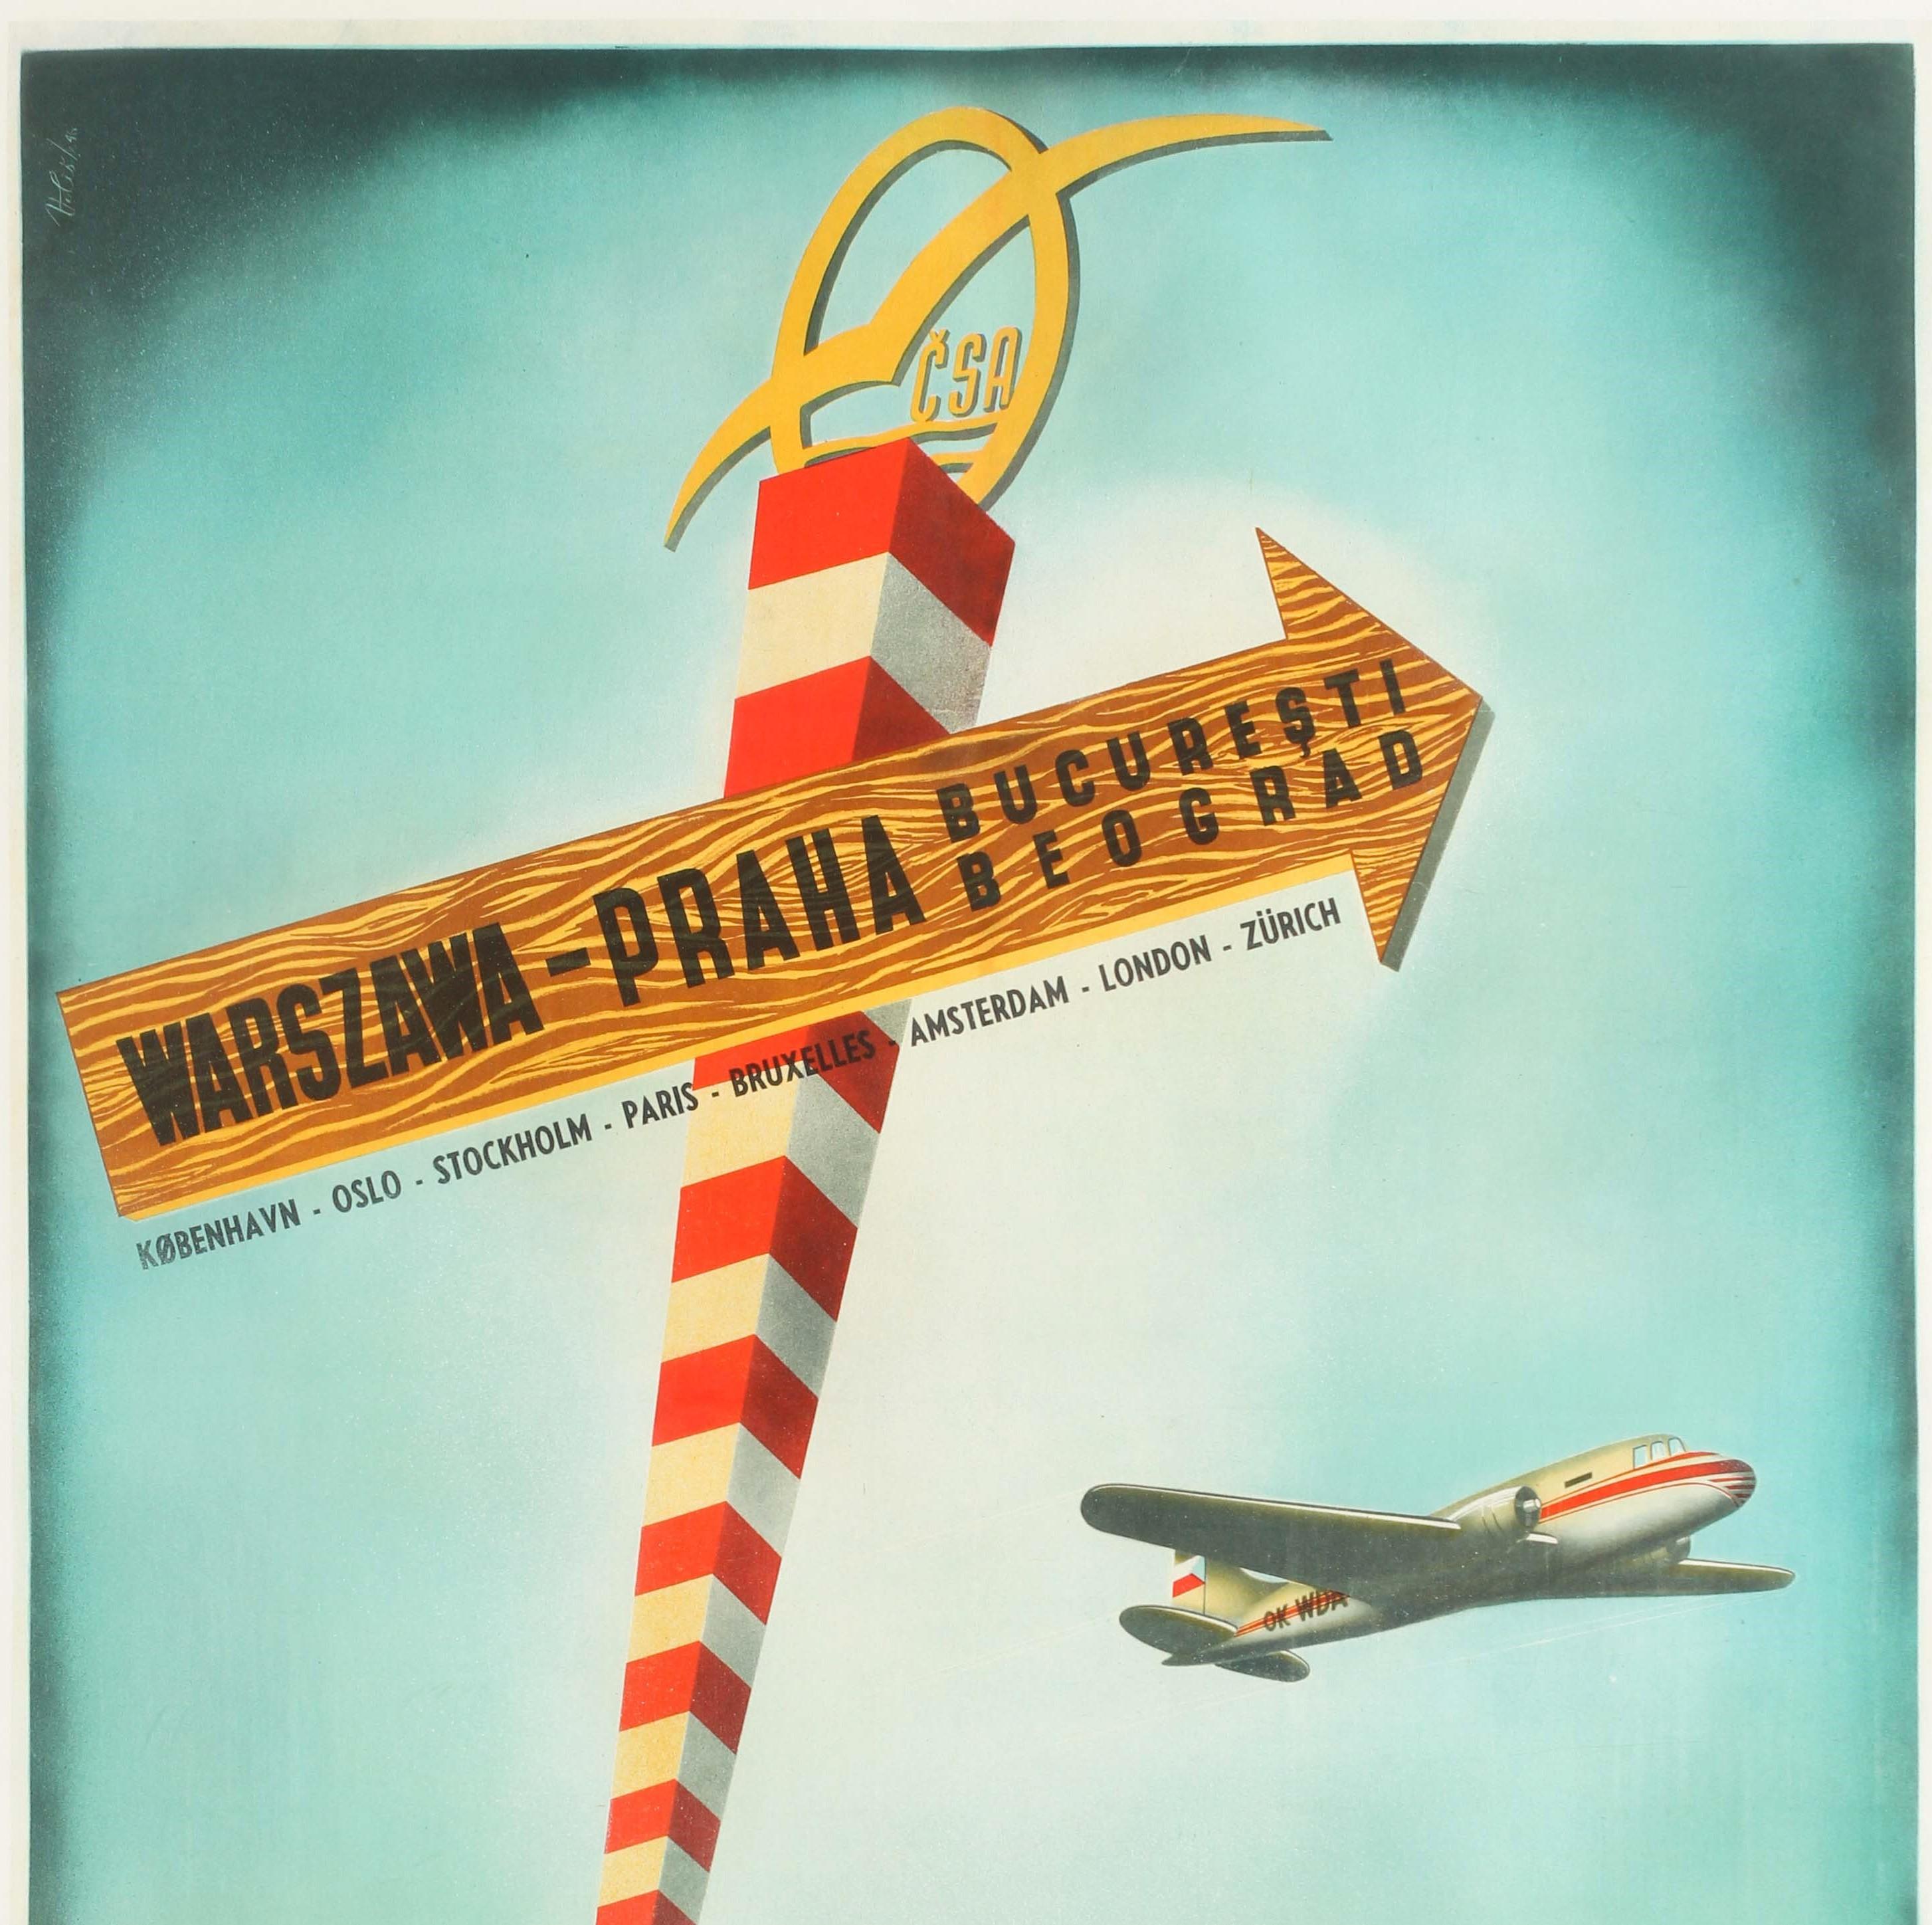 Original vintage travel poster published by CSA Czech Airlines / Ceskoslovenské Státní Aerolinie (founded 1923) to promote its flights between the East Europe cities of Warsaw, Prague, Bucharest and Belgrade / Warszawa, Praha, Bucuresti, Beograd and